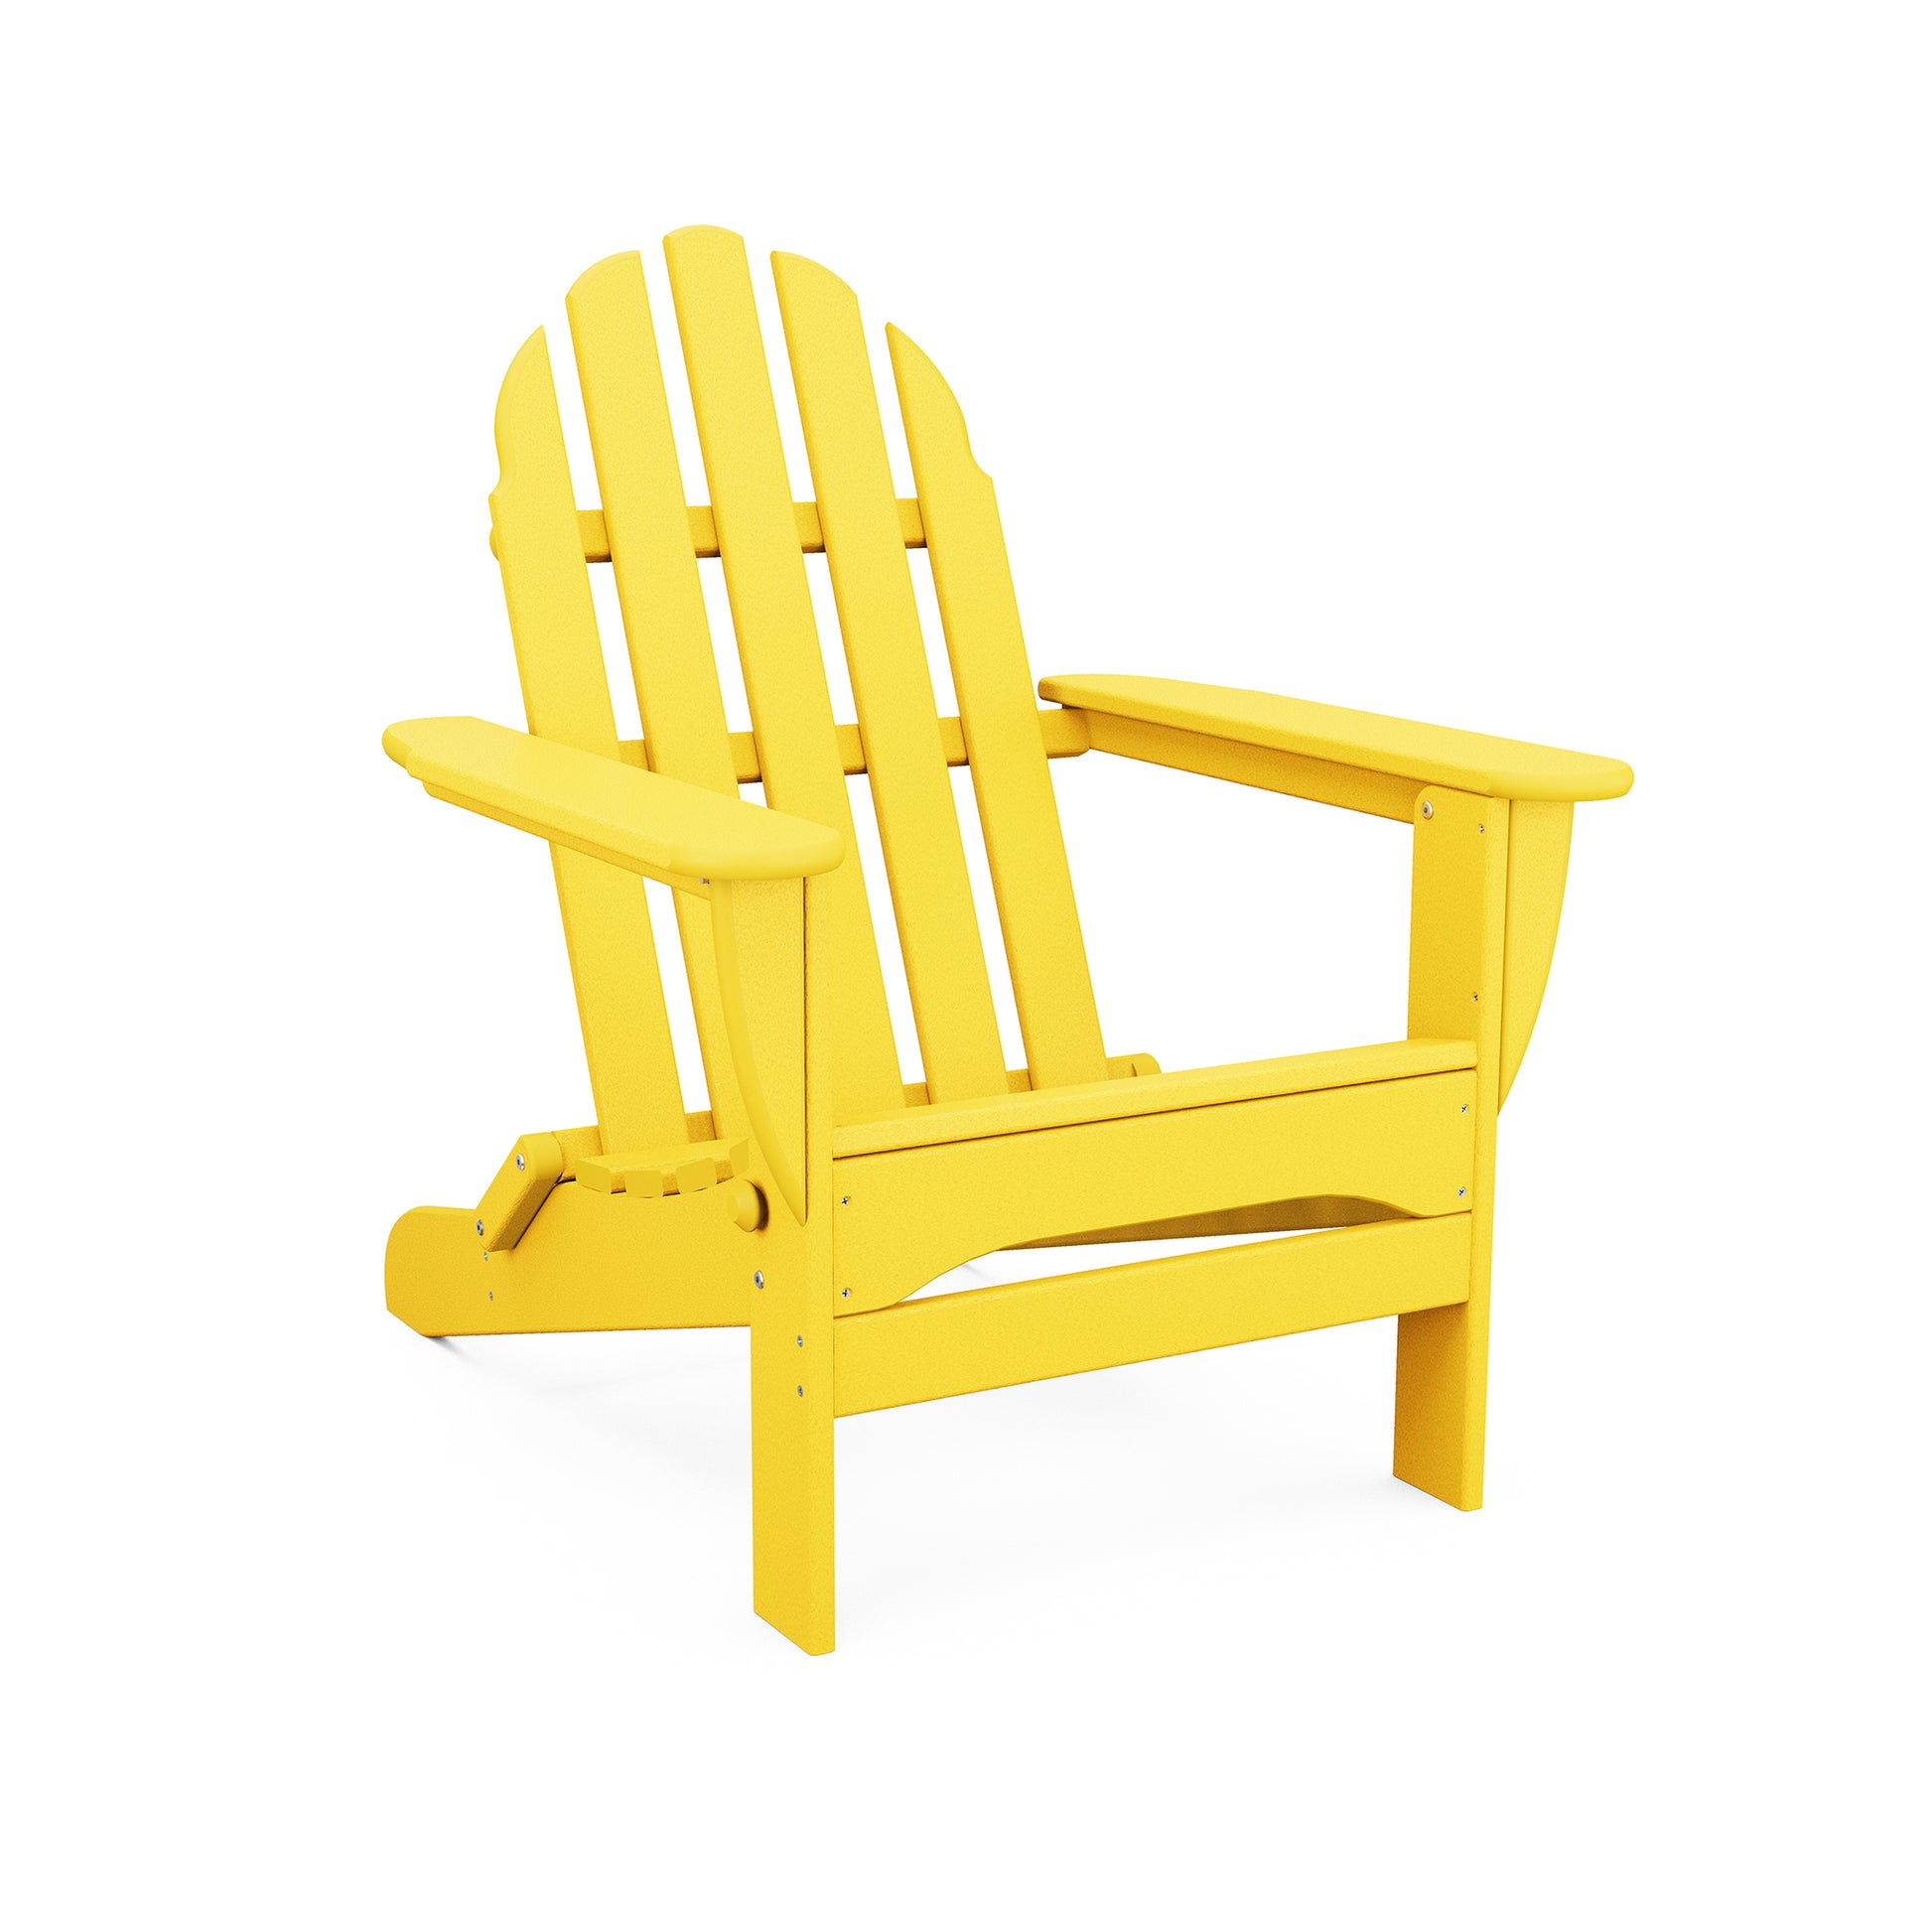 A vibrant yellow POLYWOOD® Classic Folding Adirondack chair isolated on a white background, highlighting its slatted back and wide armrests.